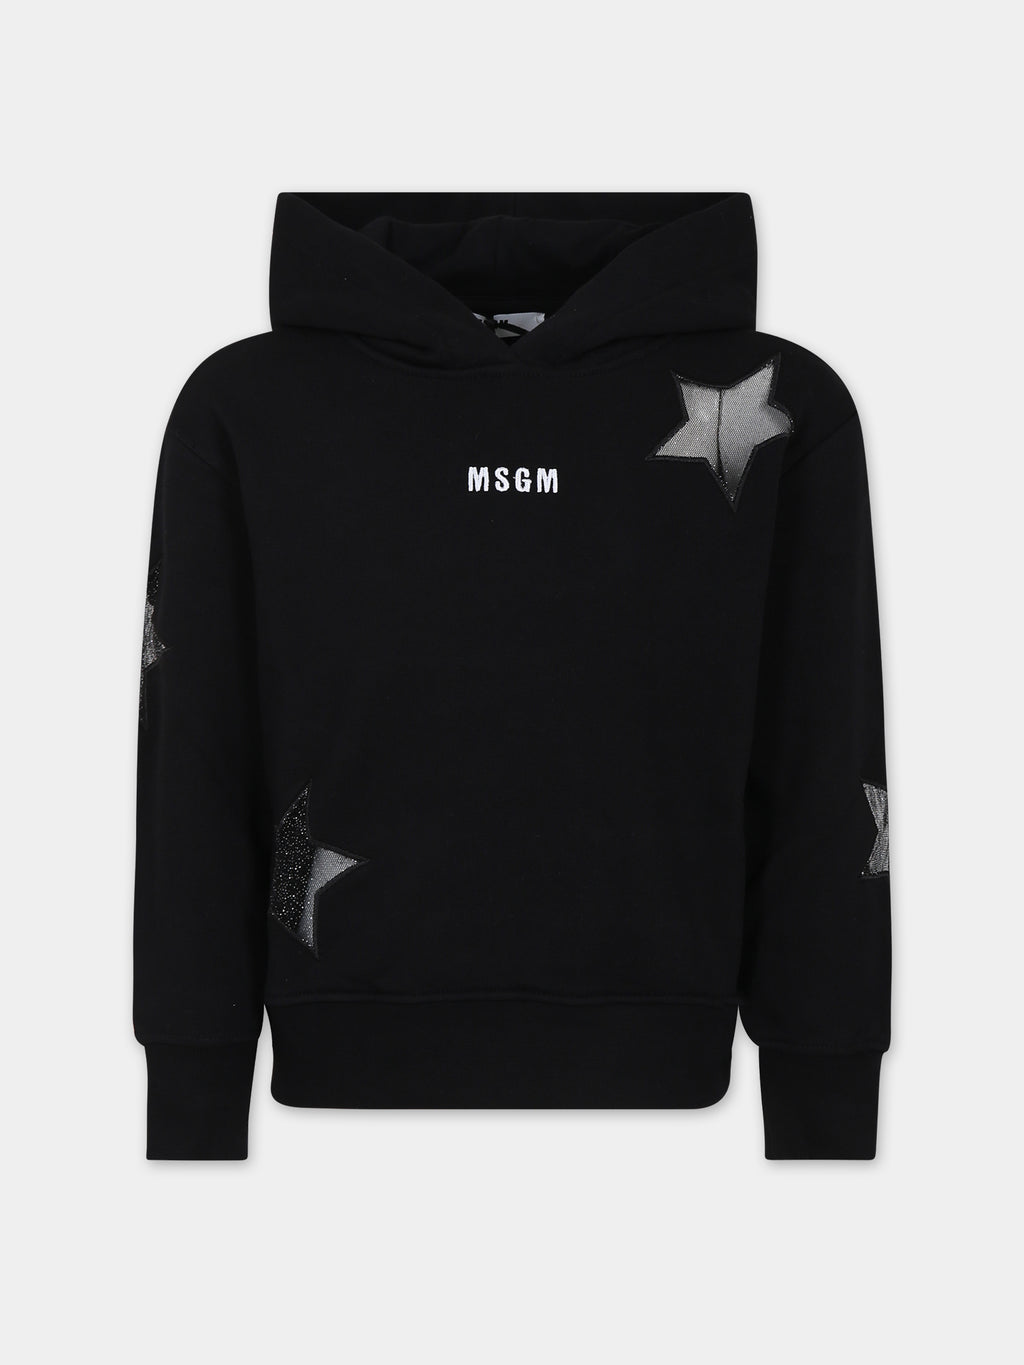 Black sweatshirt for girl with logo and stars